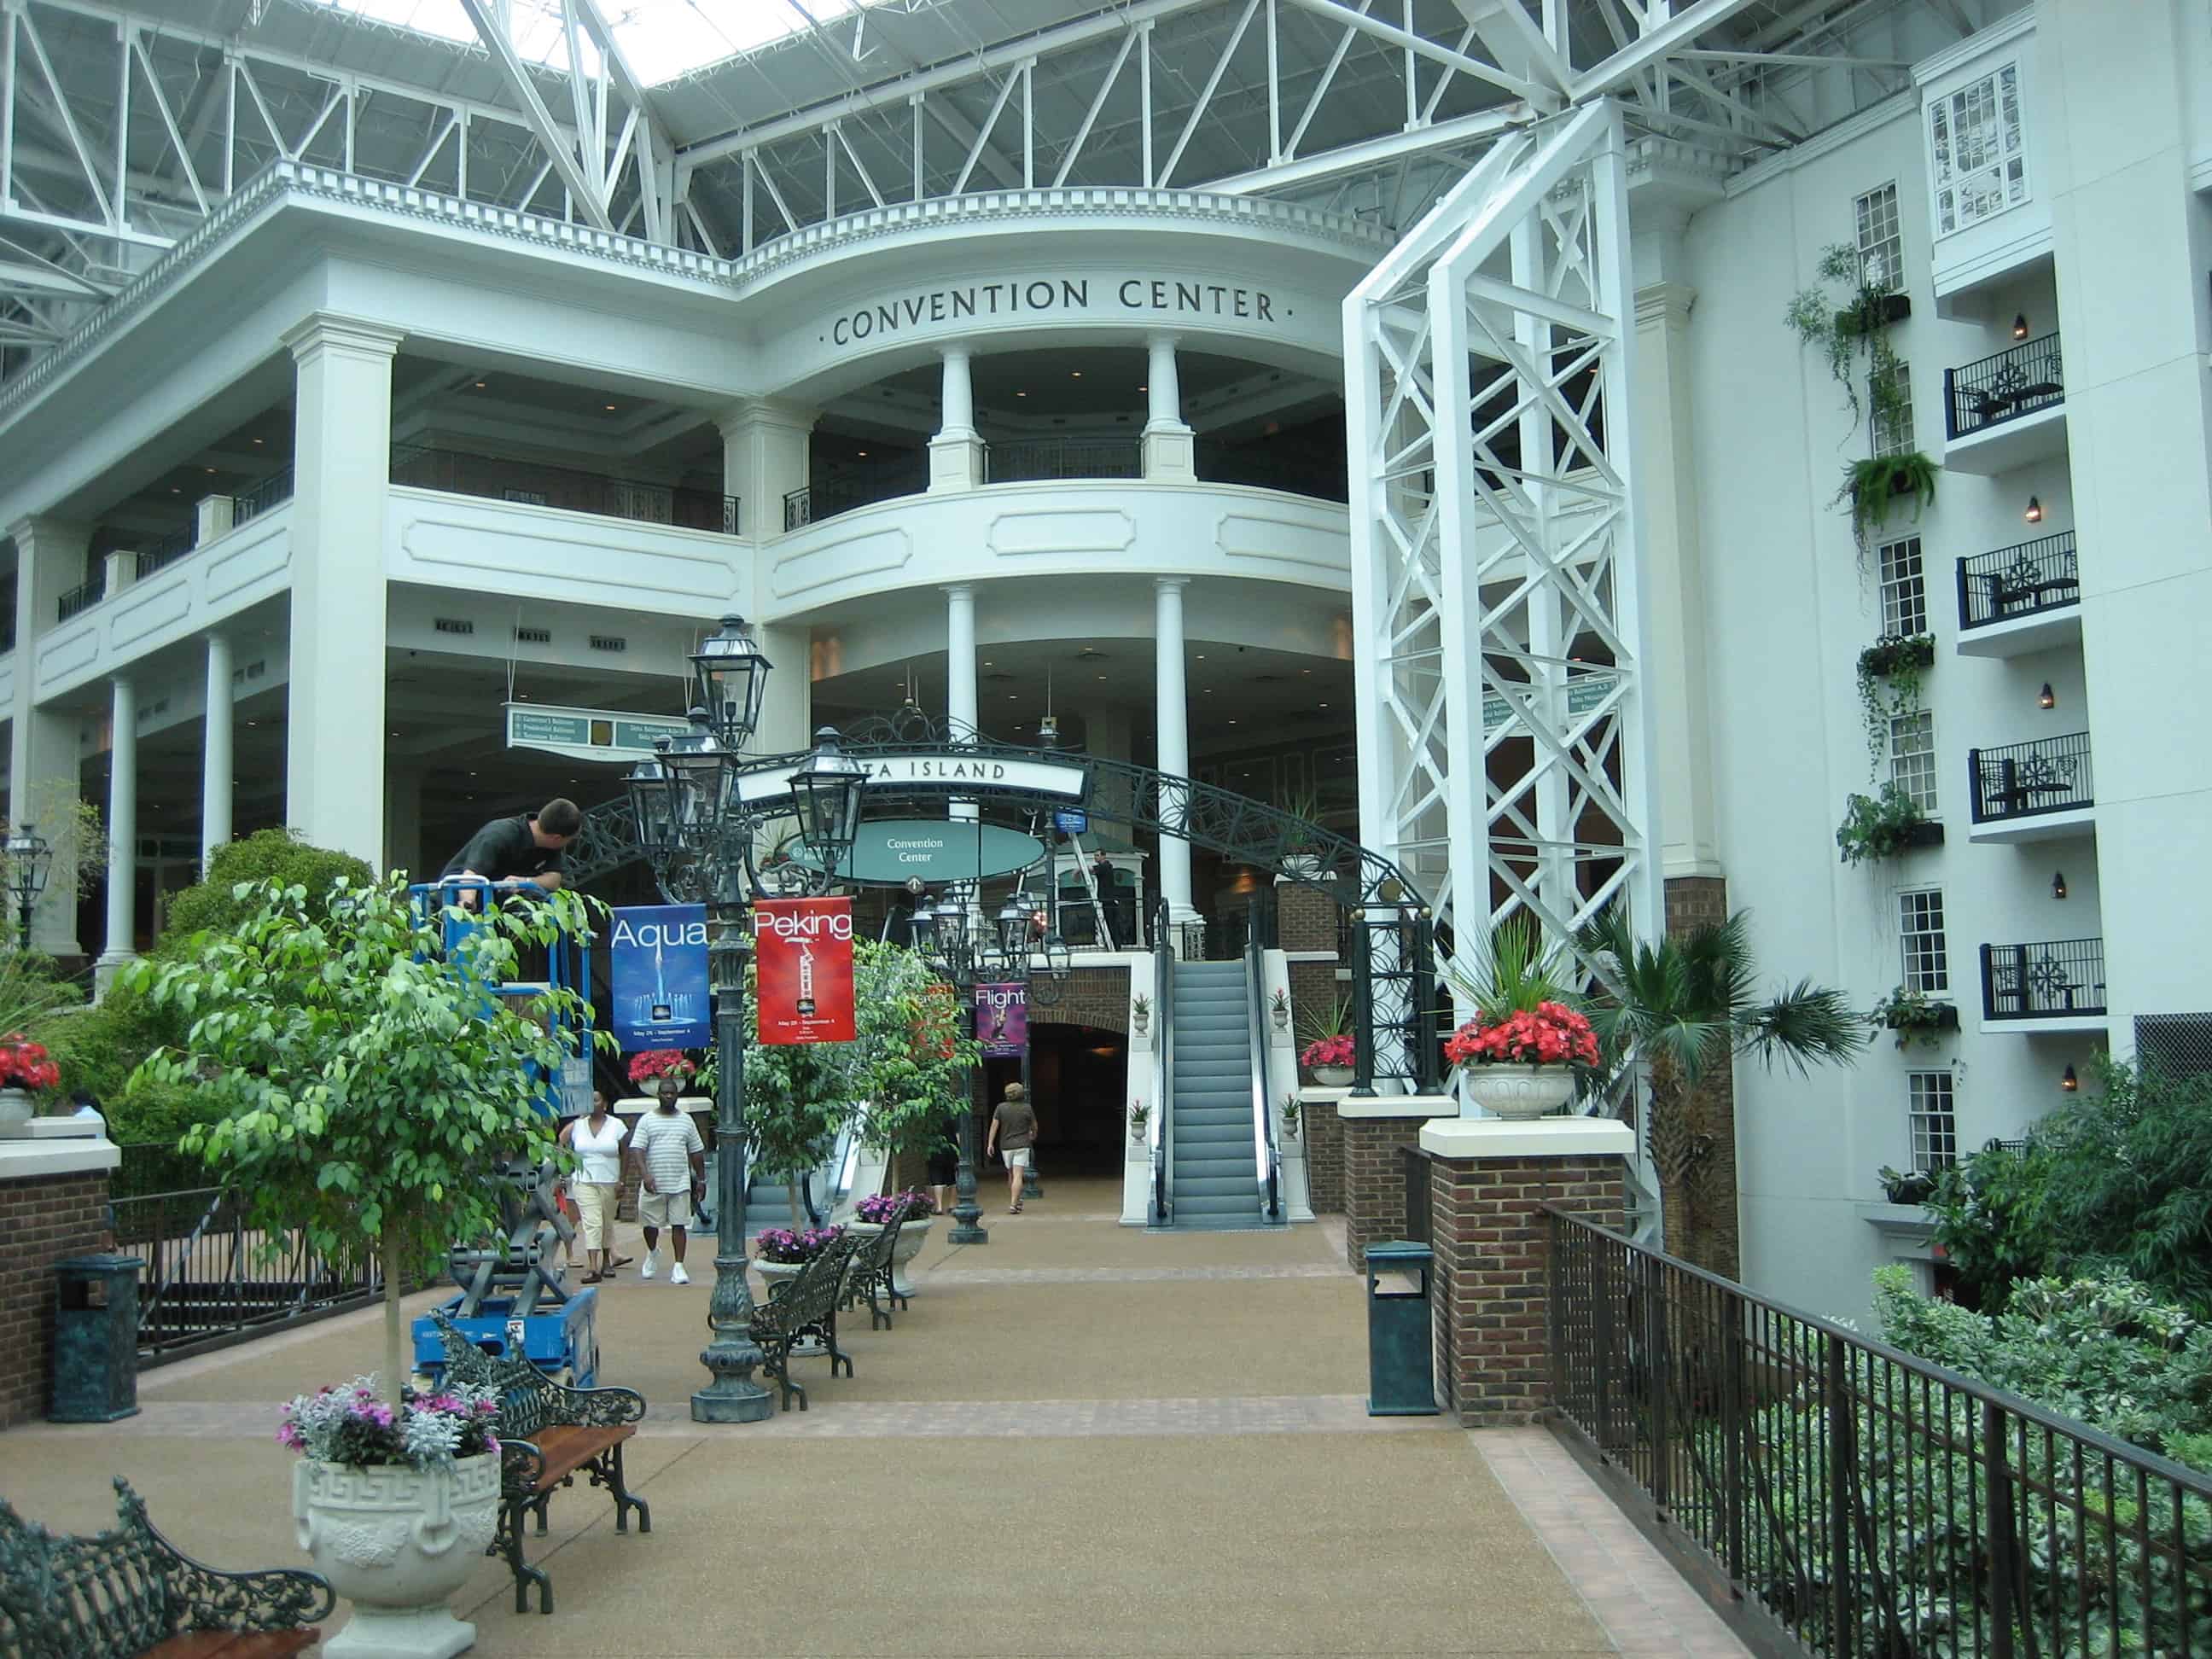 Gaylord Opryland in Nashville, Tennessee